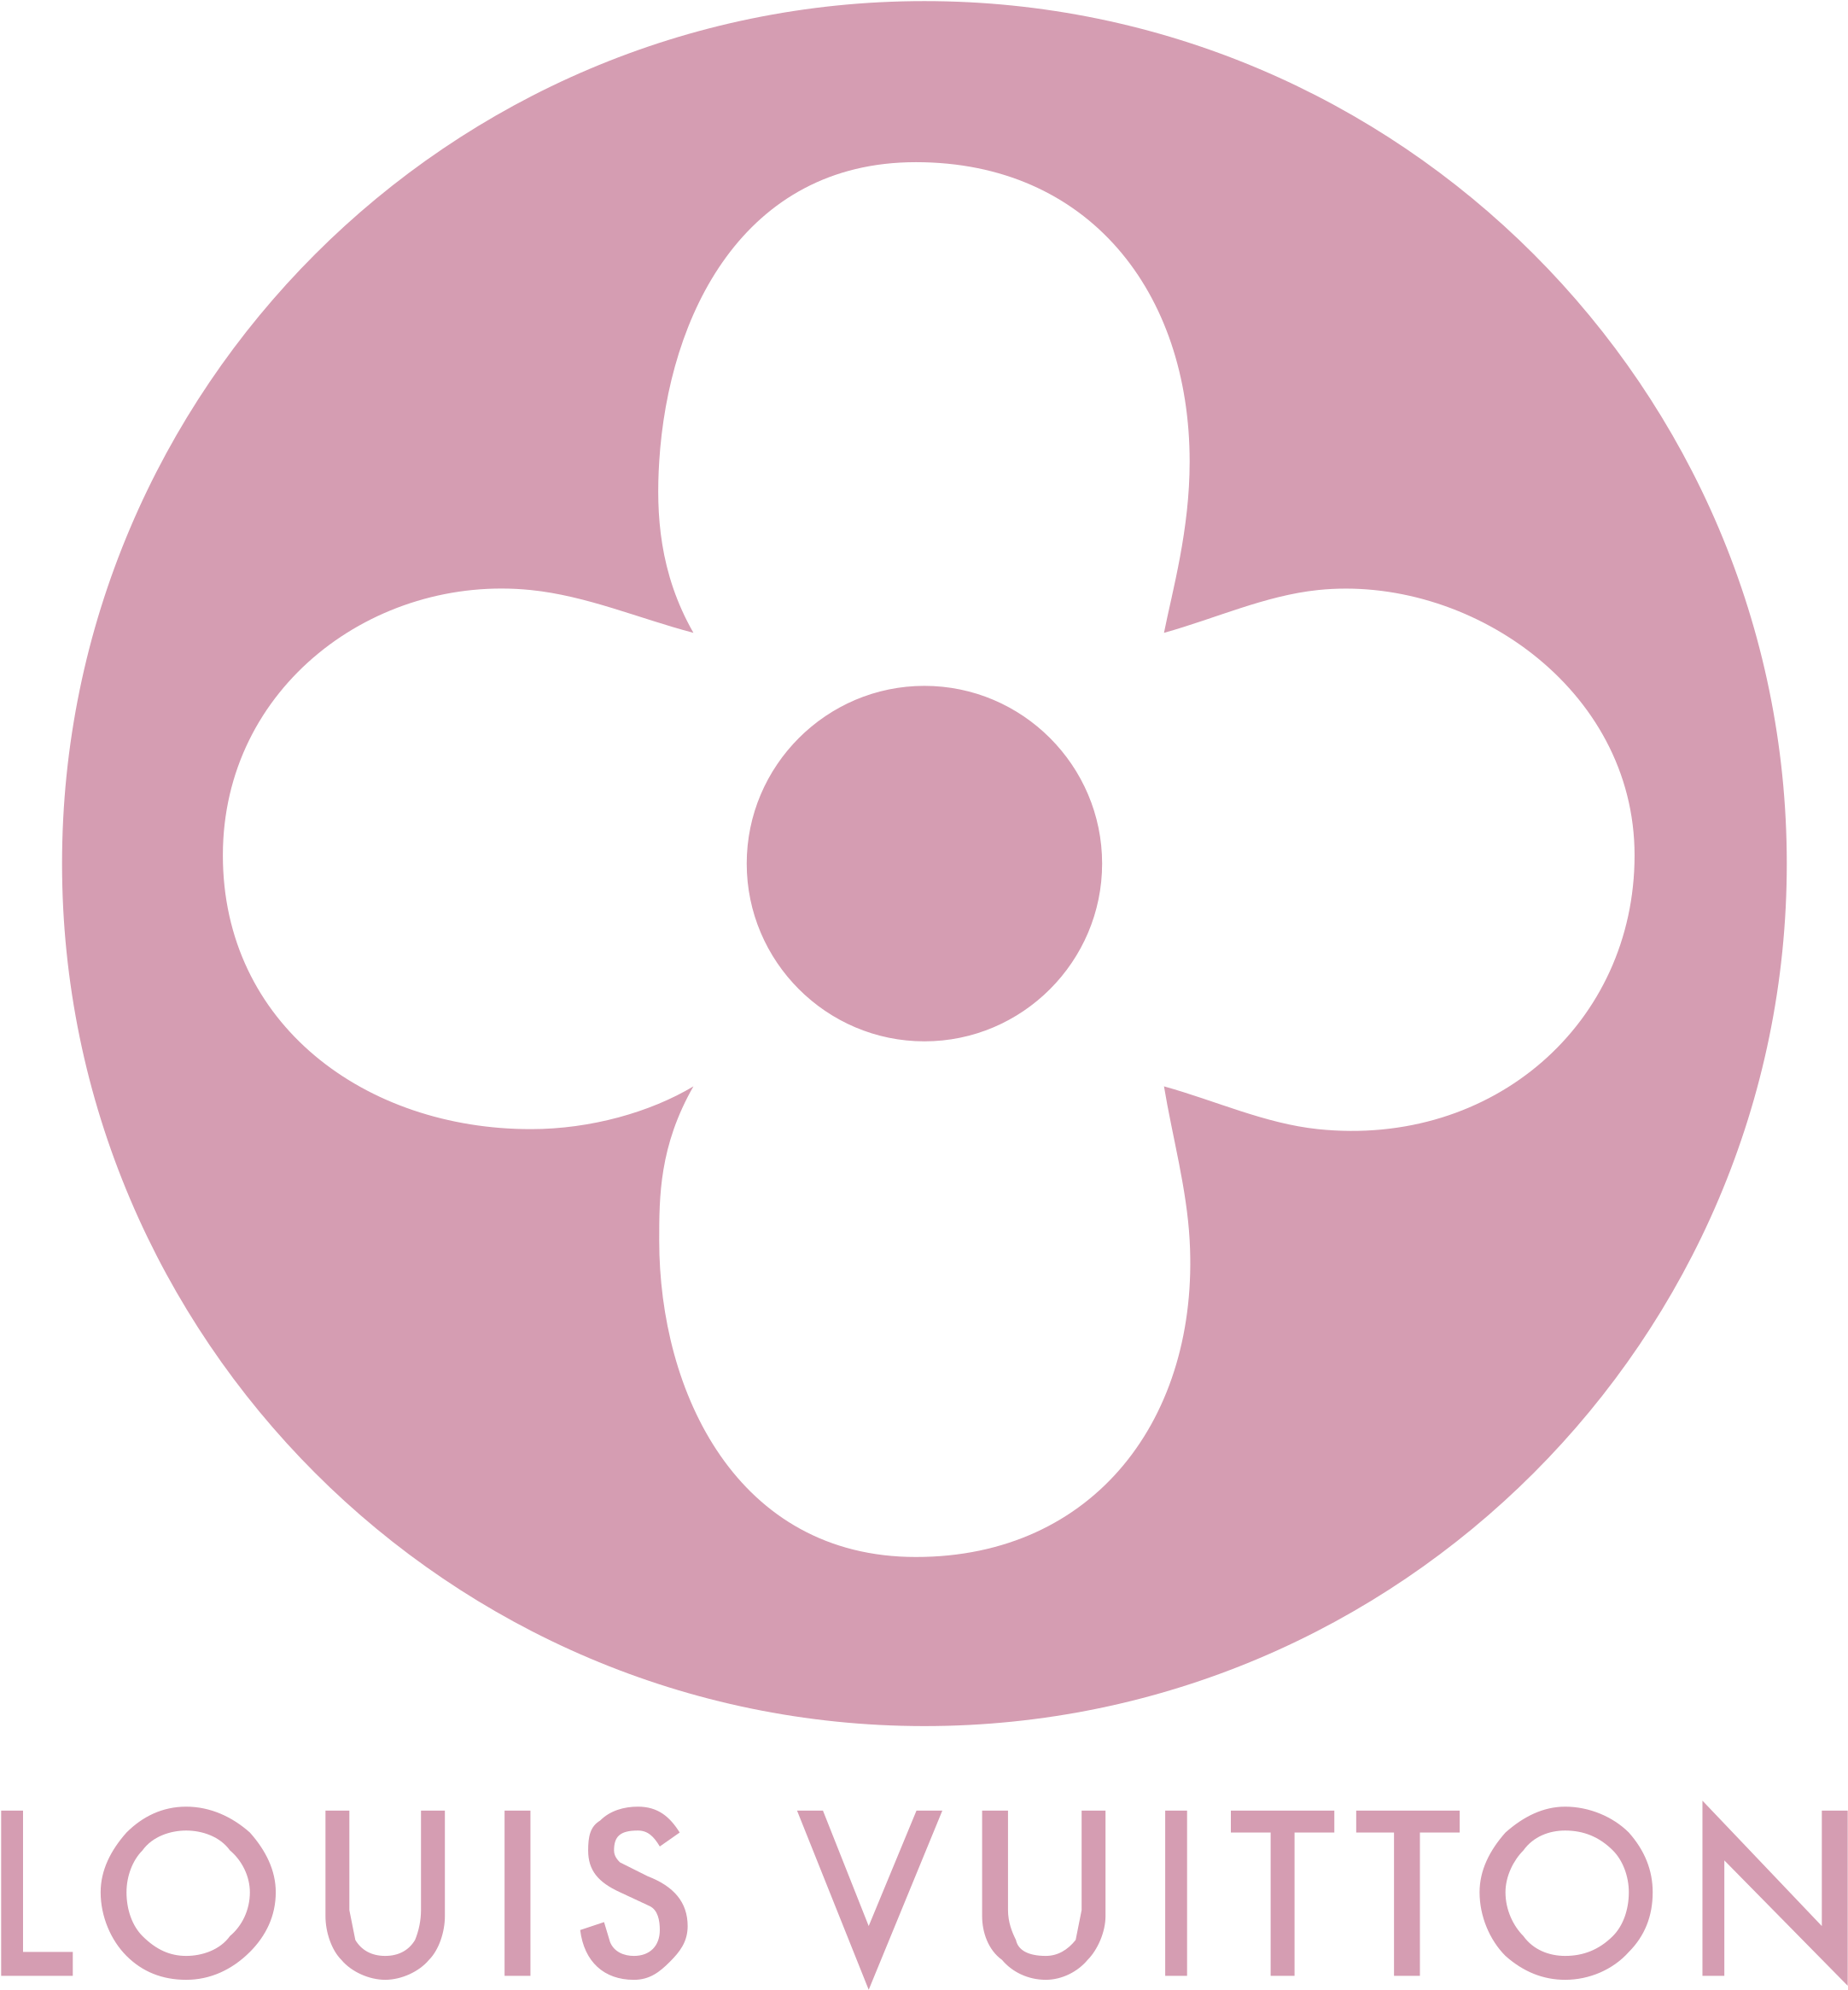 Lv png images